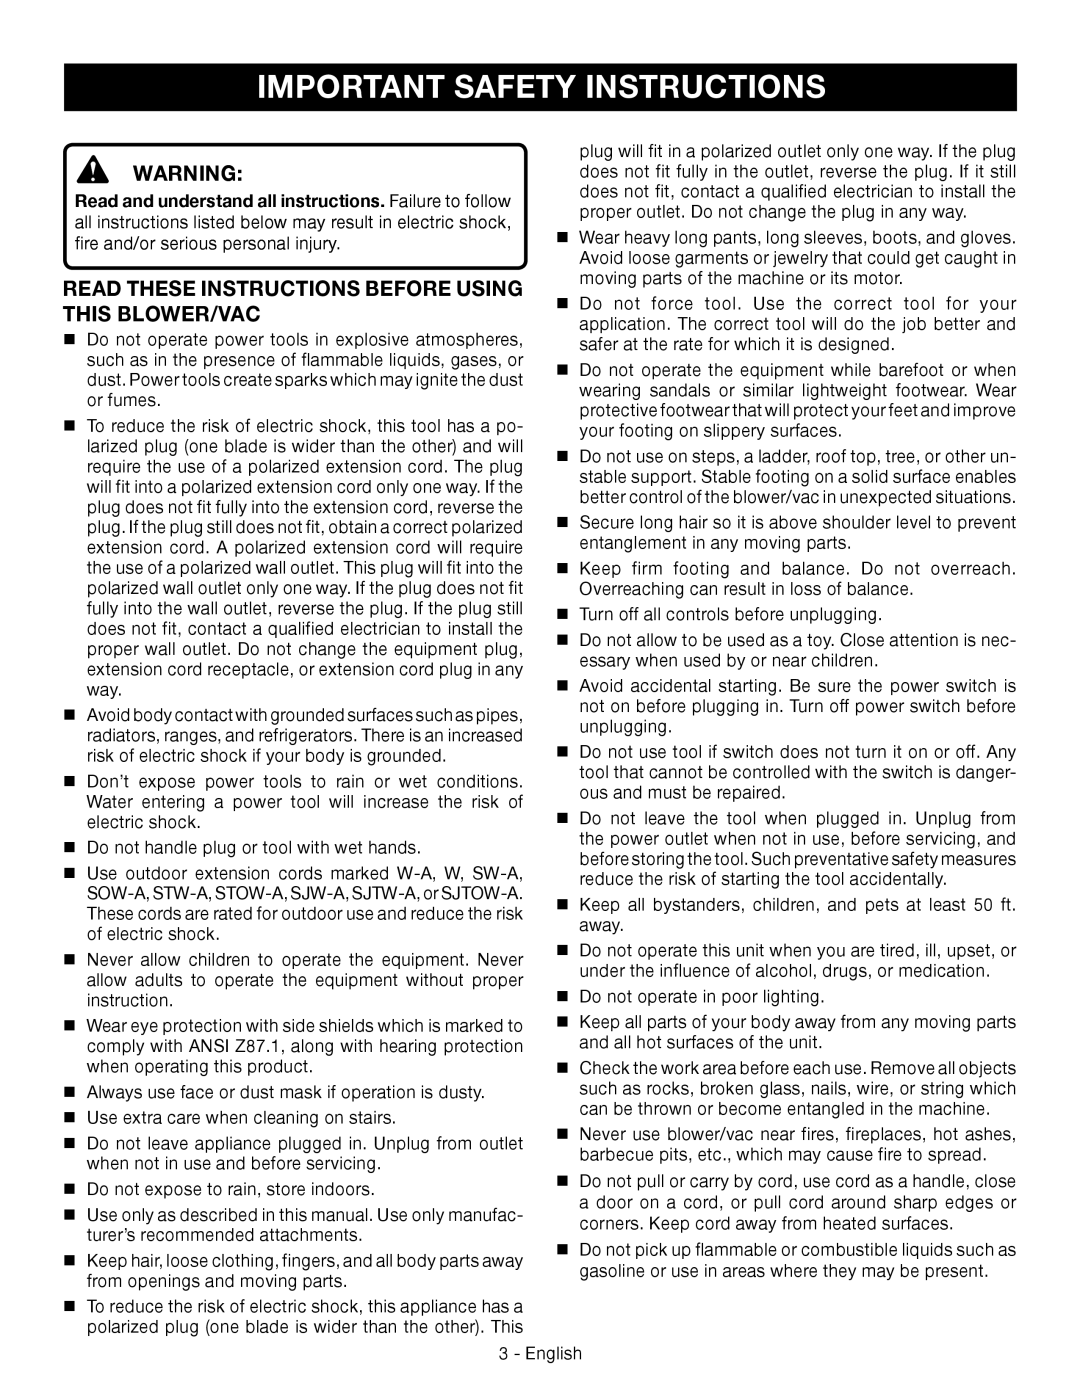 Ryobi RY42110 manuel dutilisation Important Safety Instructions, Read These Instructions Before Using This Blower/Vac 